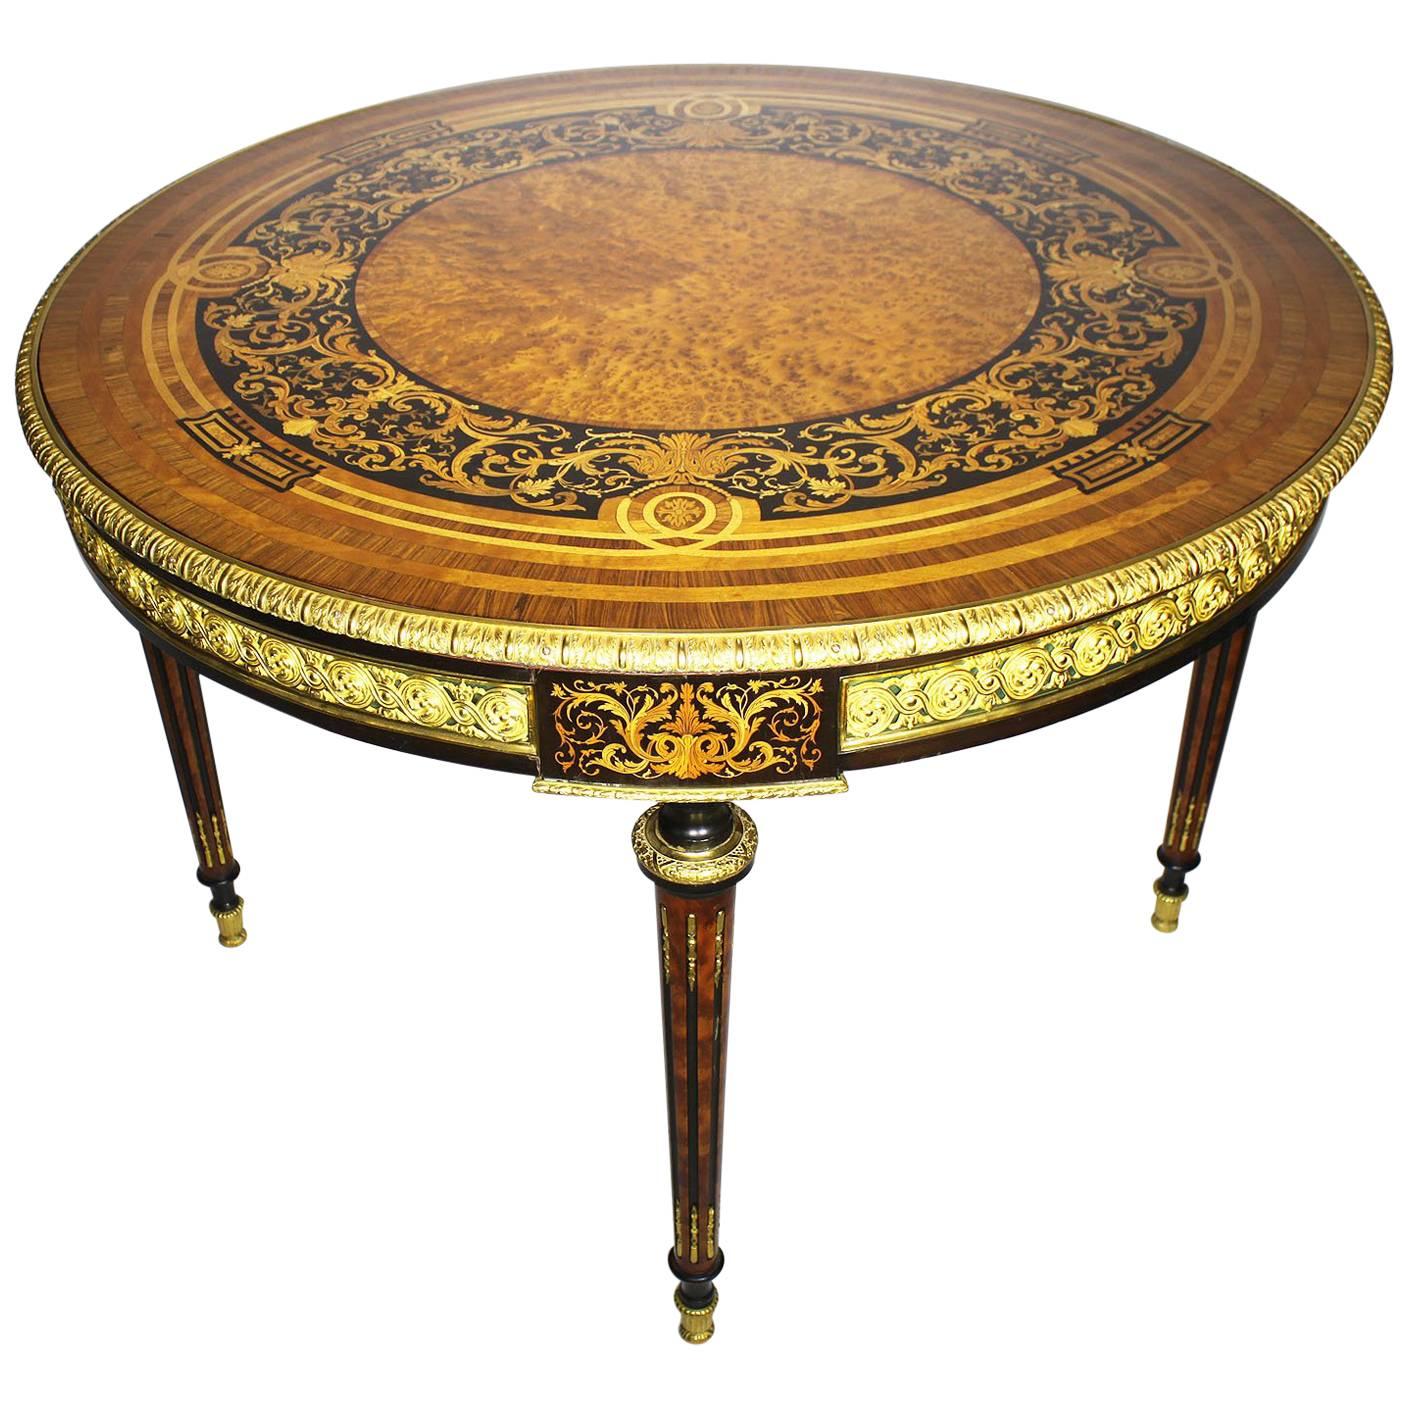 French 19th Century Louis XVI Style Gilt-Bronze Mounted Marquetry Center Table For Sale